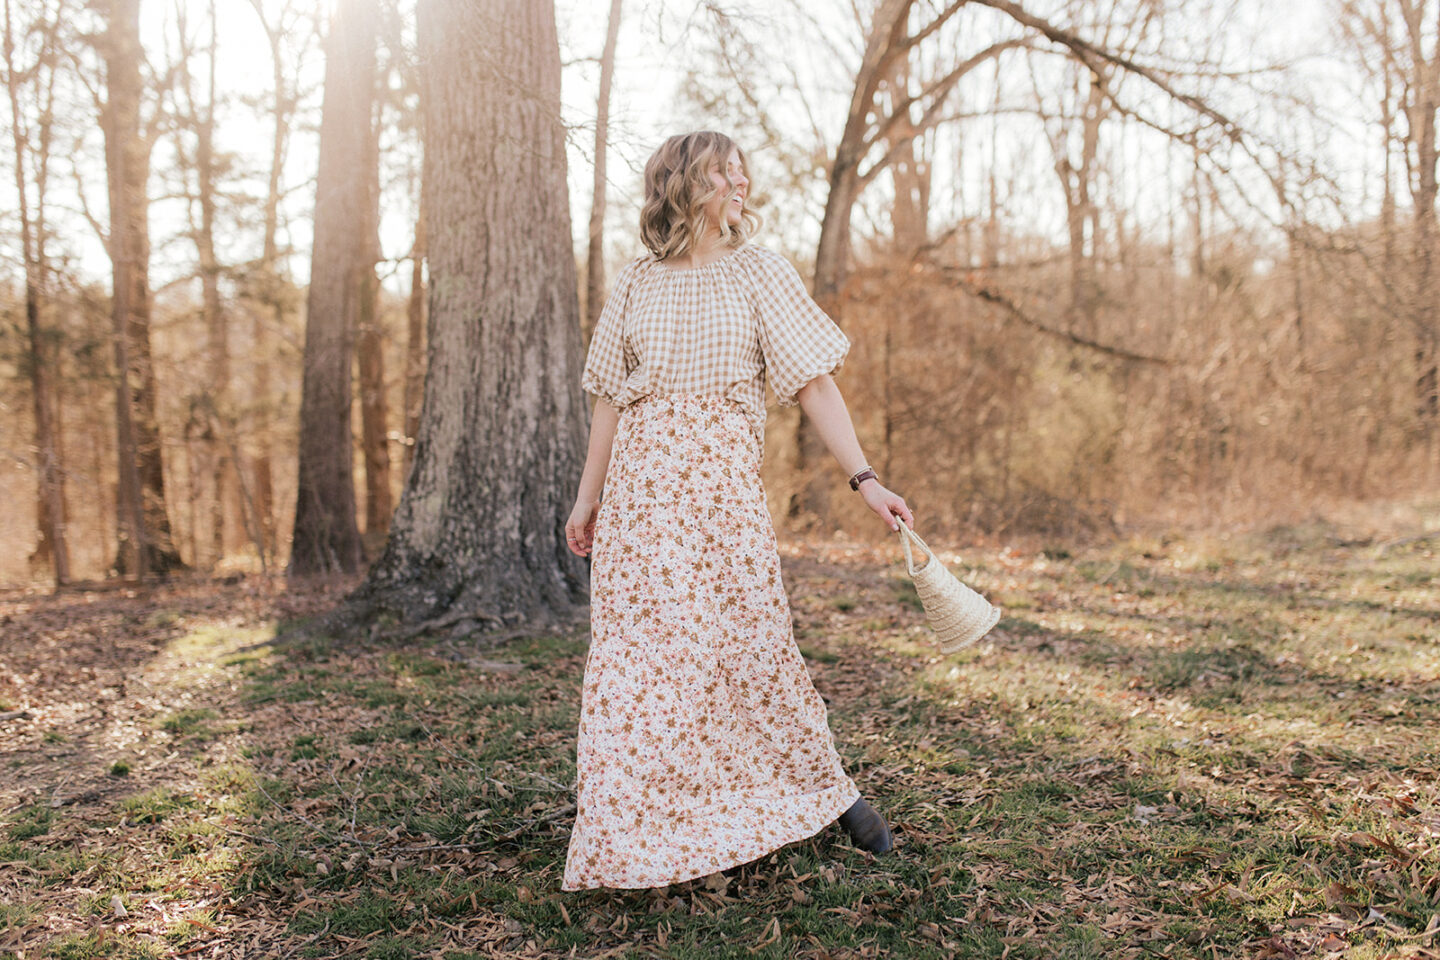 Pattern Mixing Florals and Gingham for Spring | Louella Reese